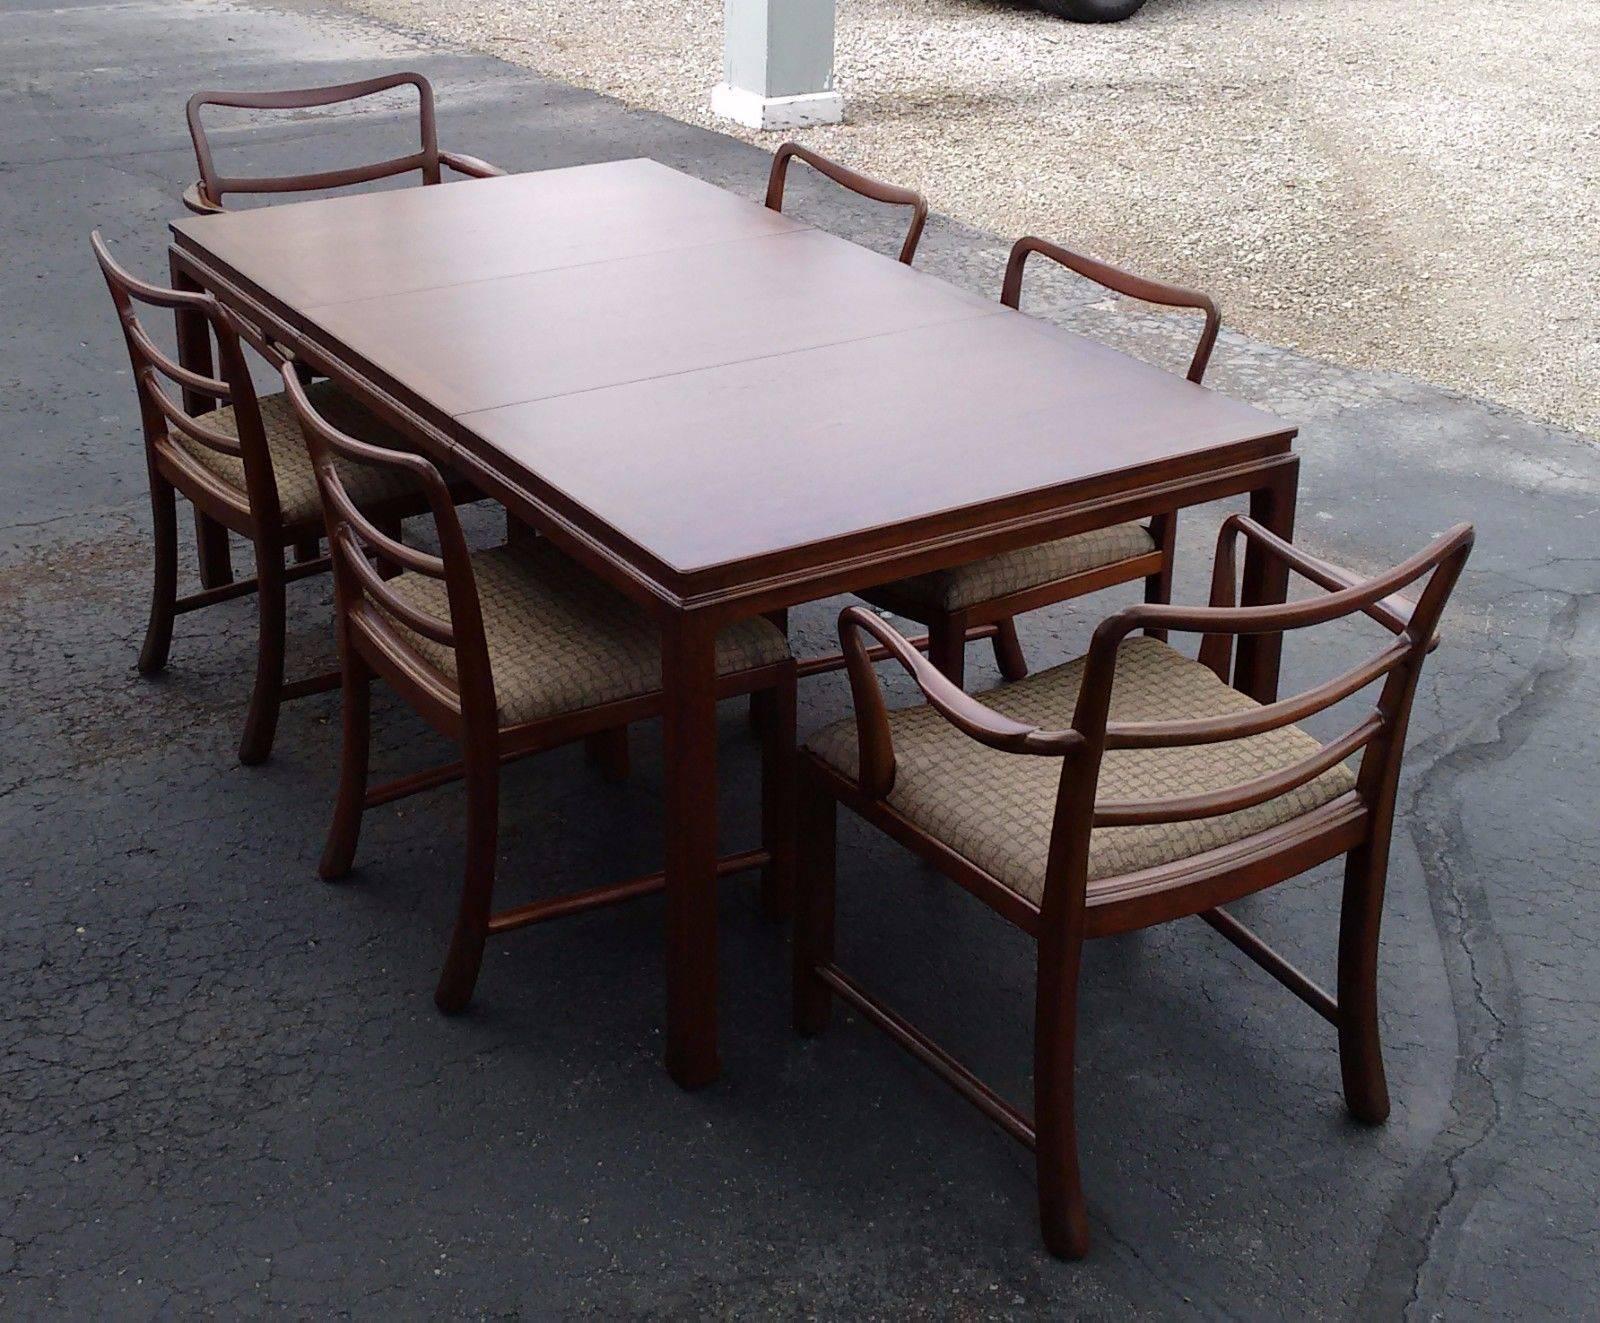 Mid-20th Century Mid-Century Modern Brown Mahogany Dunbar Extendable Dining Table and Six Chairs